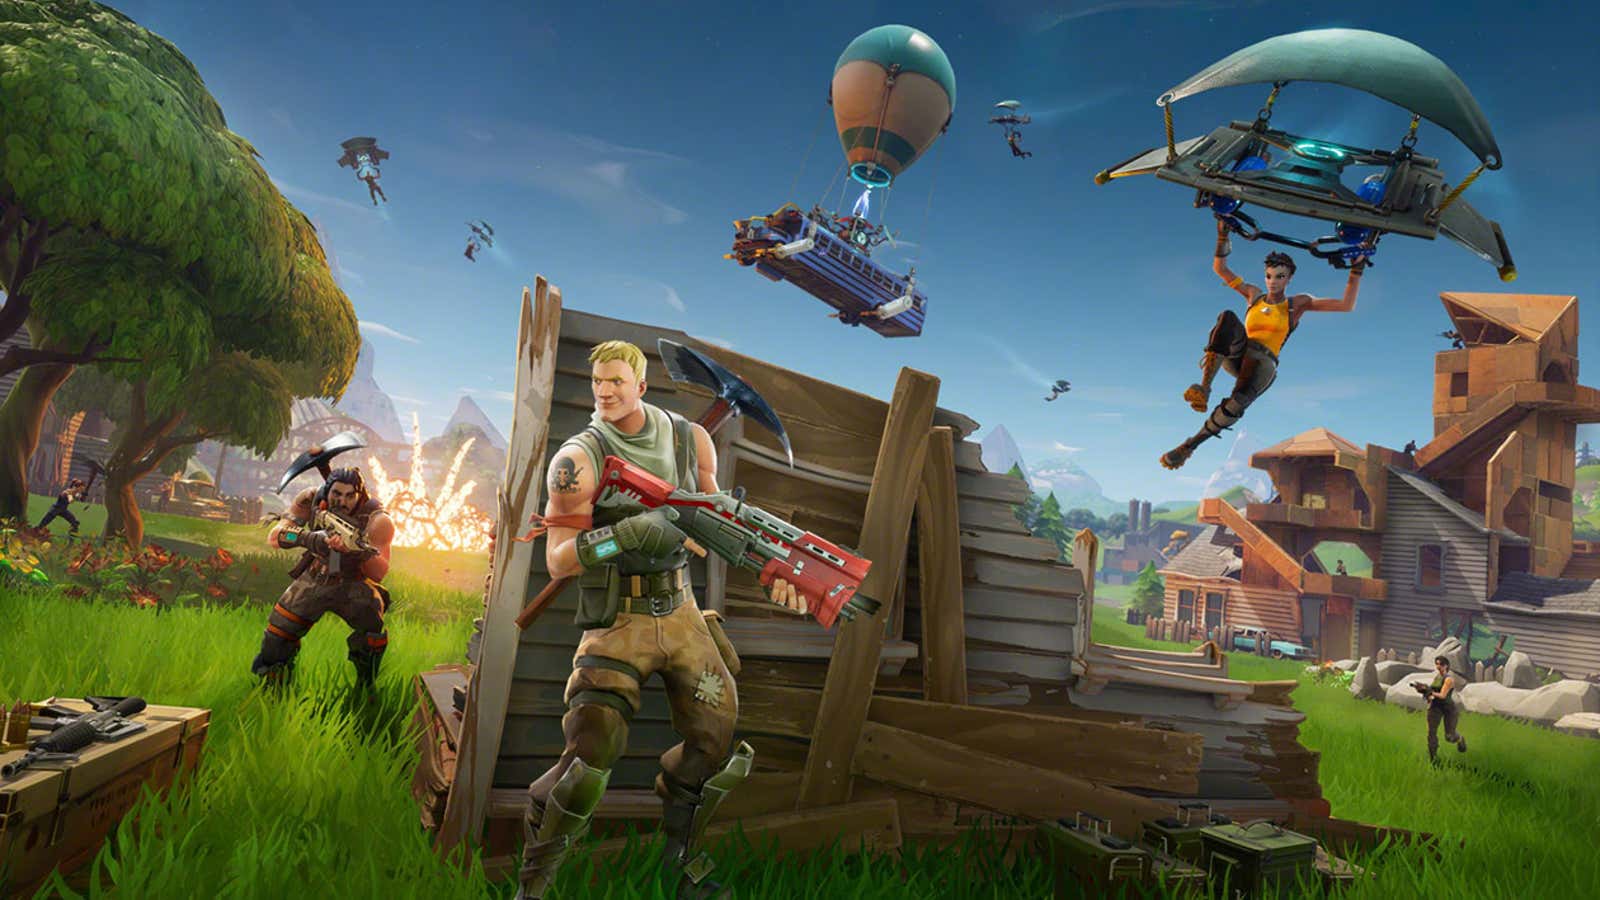 Fortnite shattered the record for annual digital revenue last year.